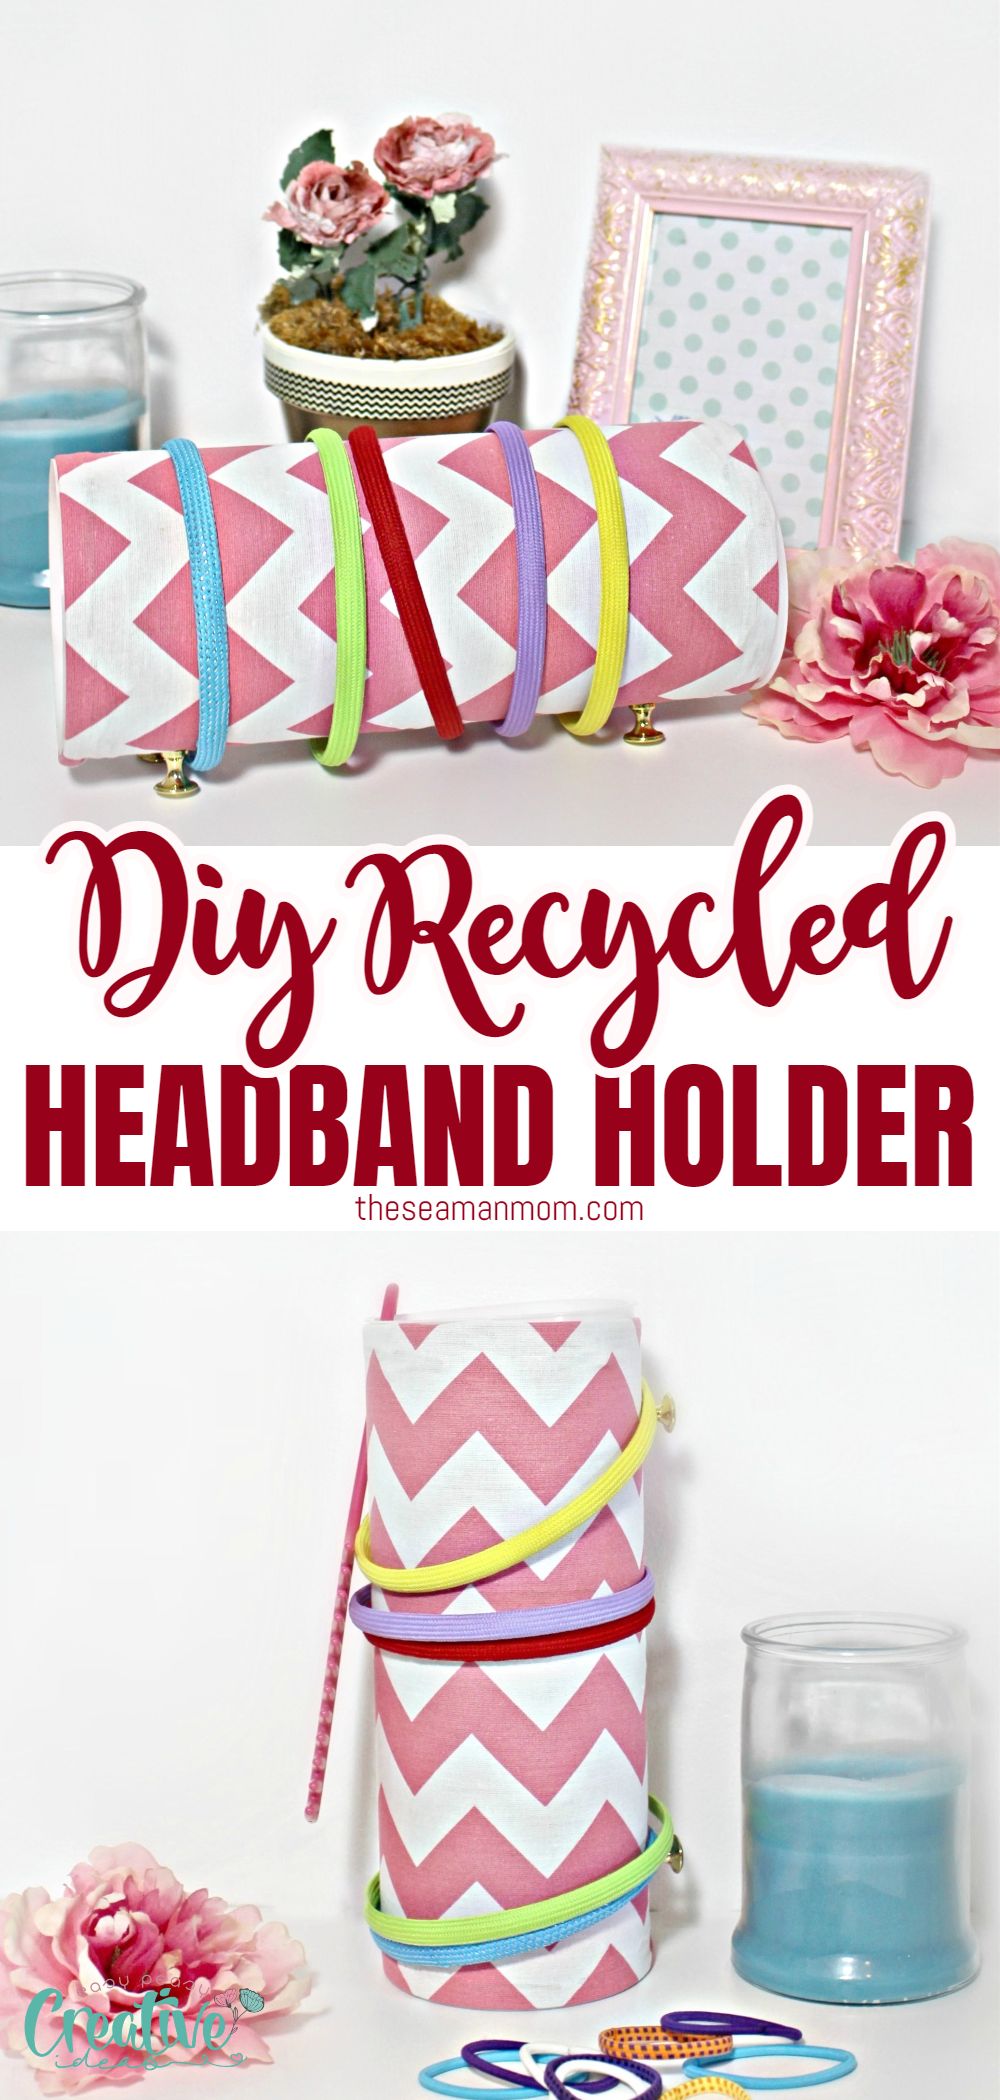 Struggling to keep your headbands organized and tidy? It's time to put all those worries and struggles to rest because making your own headband holder is now so easy peasy! Instead of buying a headband organizer, try making one with this easy tutorial. No, it's not too hard, and no, you don’t need a sewing machine. via @petroneagu